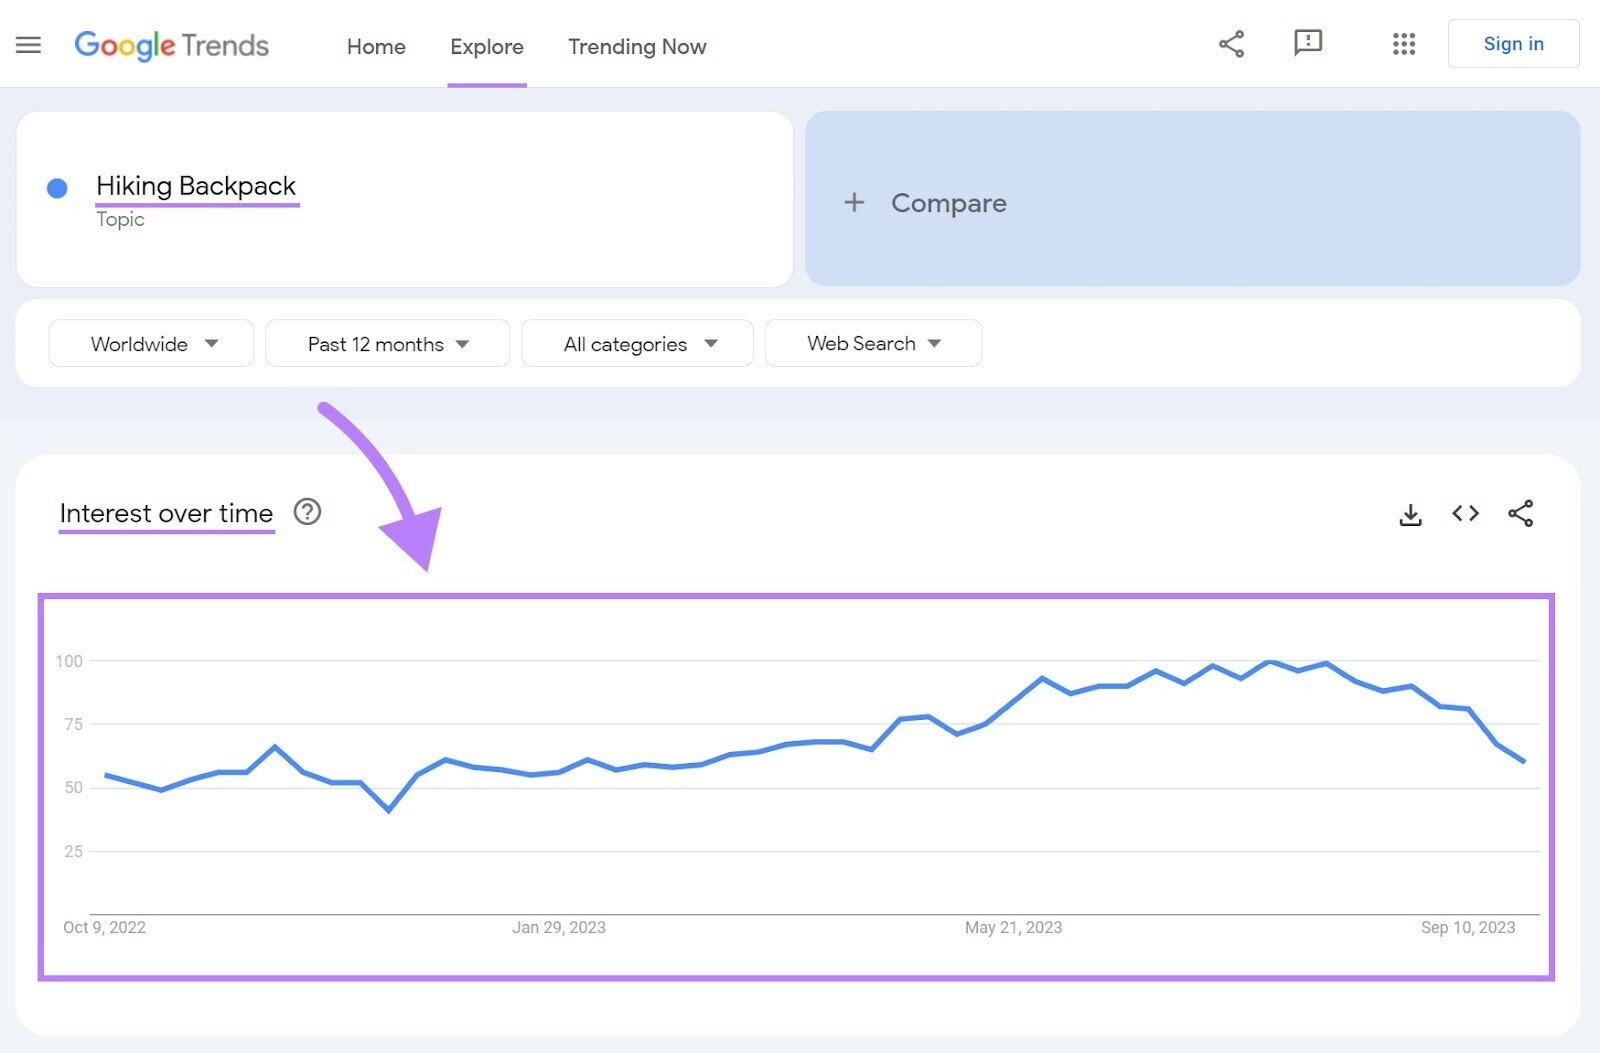 Google Trends interest over time graph showing results for hiking backpack